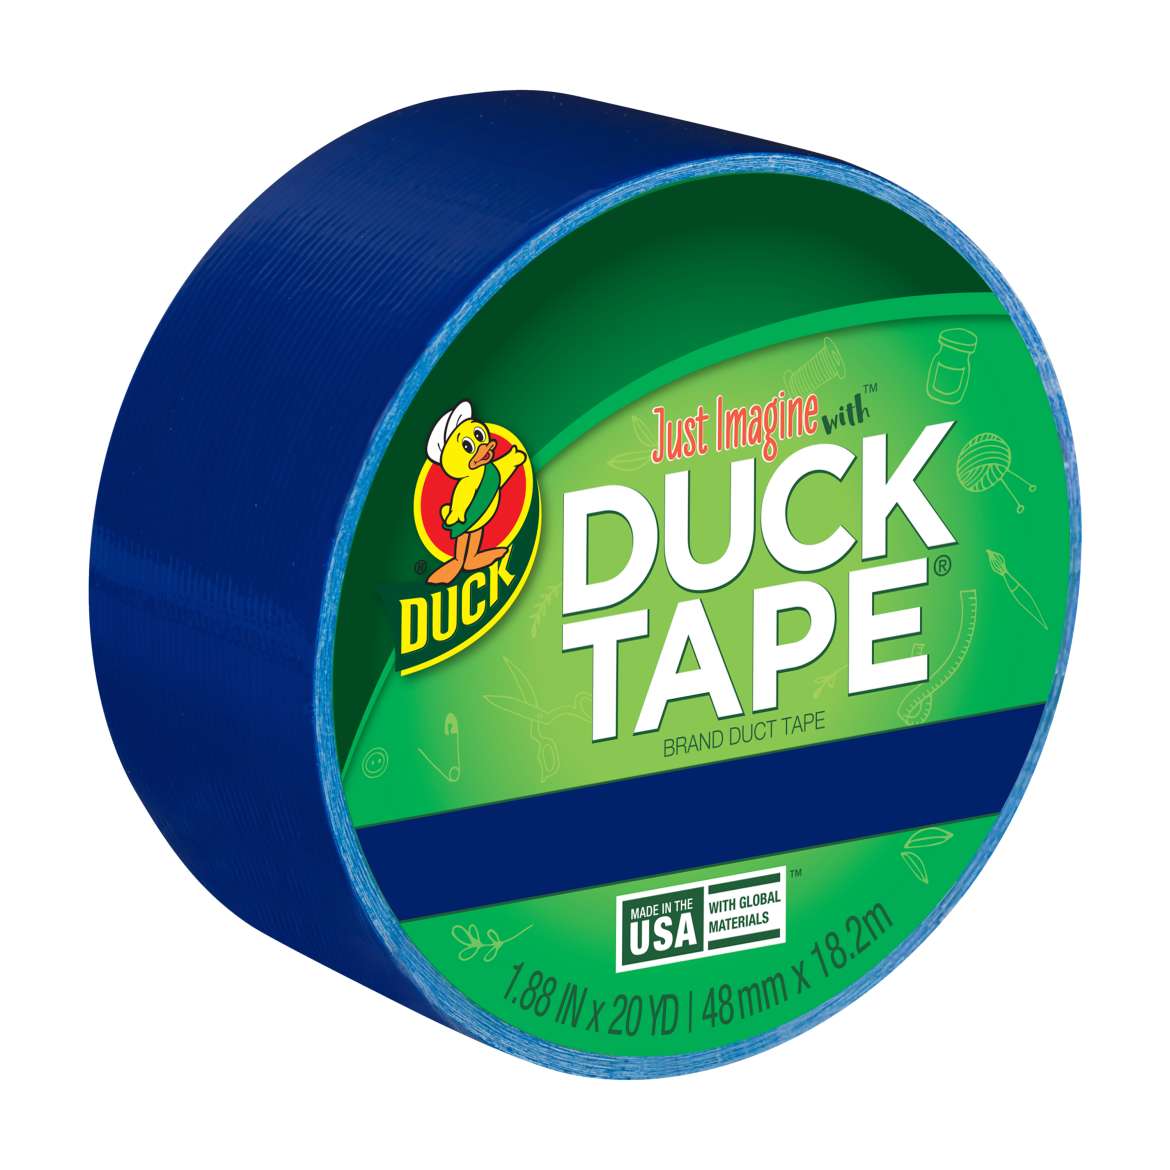 Color Duck Tape® Brand Duct Tape - Navy Blue, 1.88 in. x 20 yd.